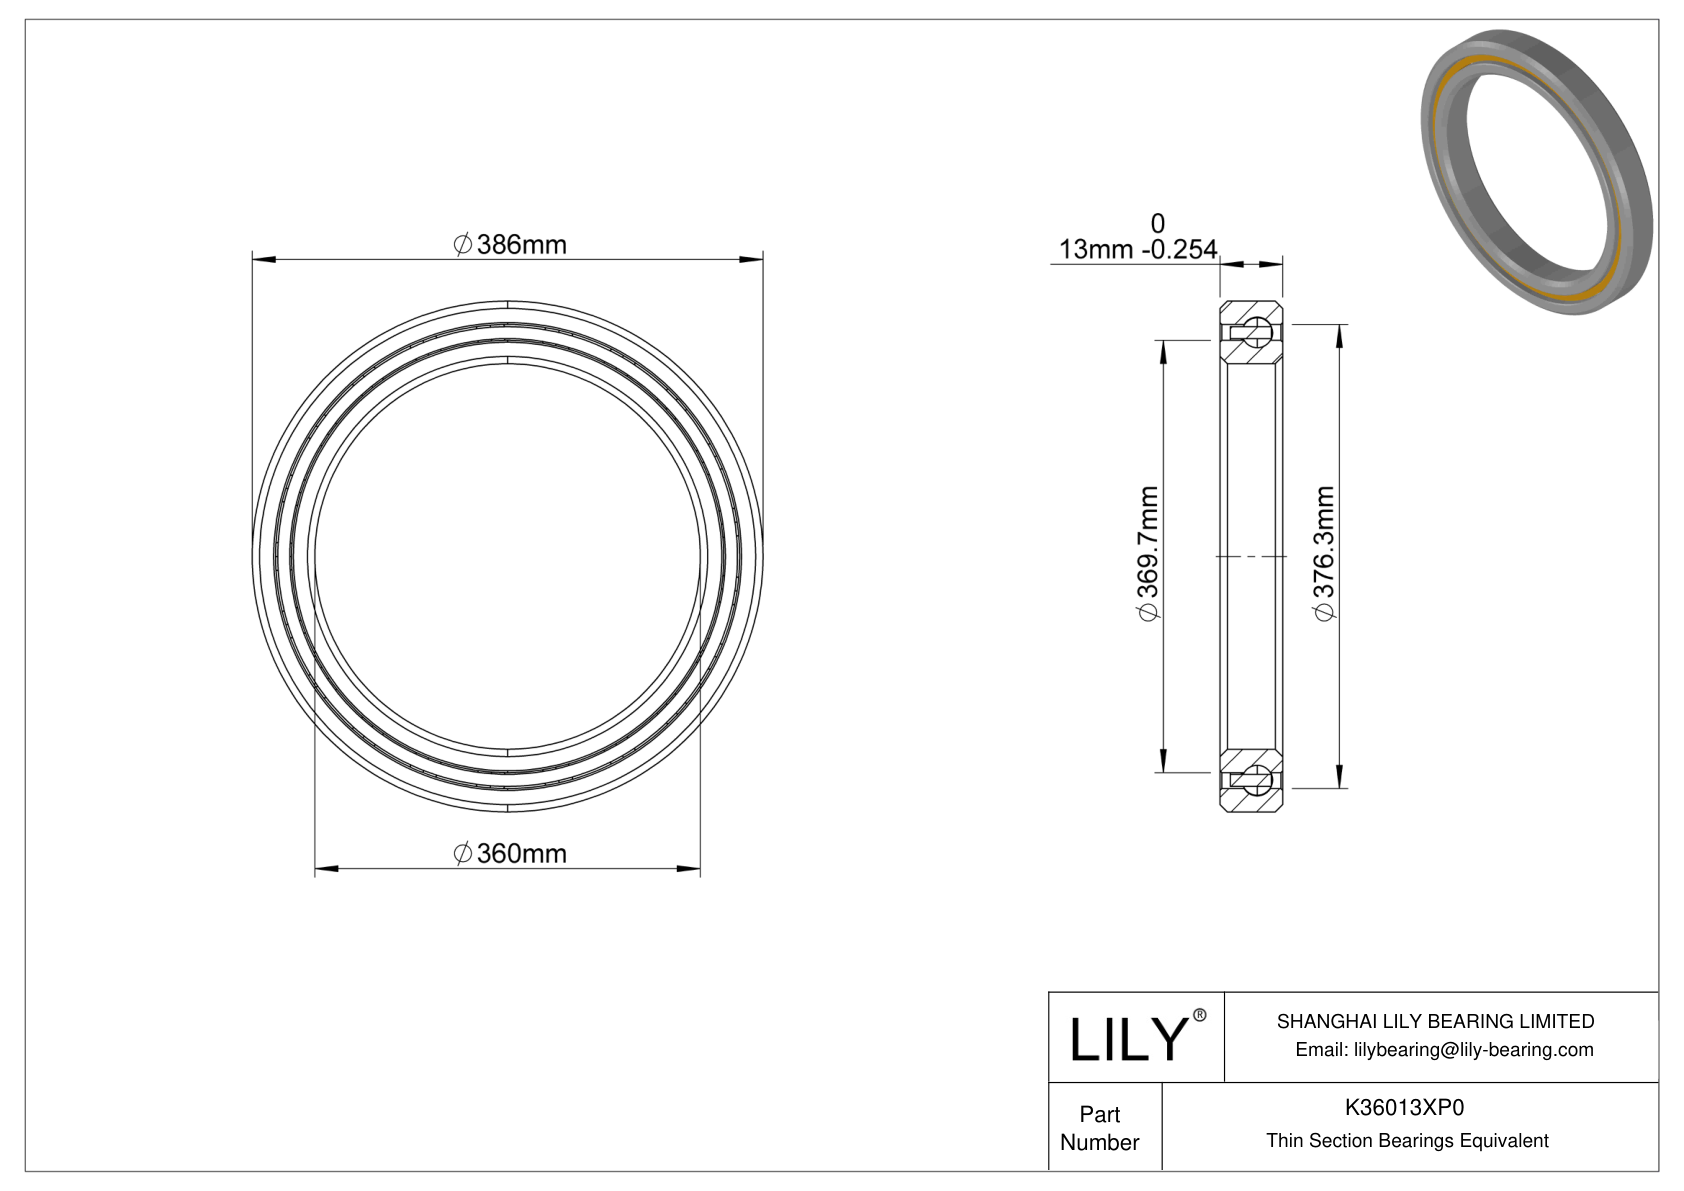 K36013XP0 Constant Section (CS) Bearings cad drawing